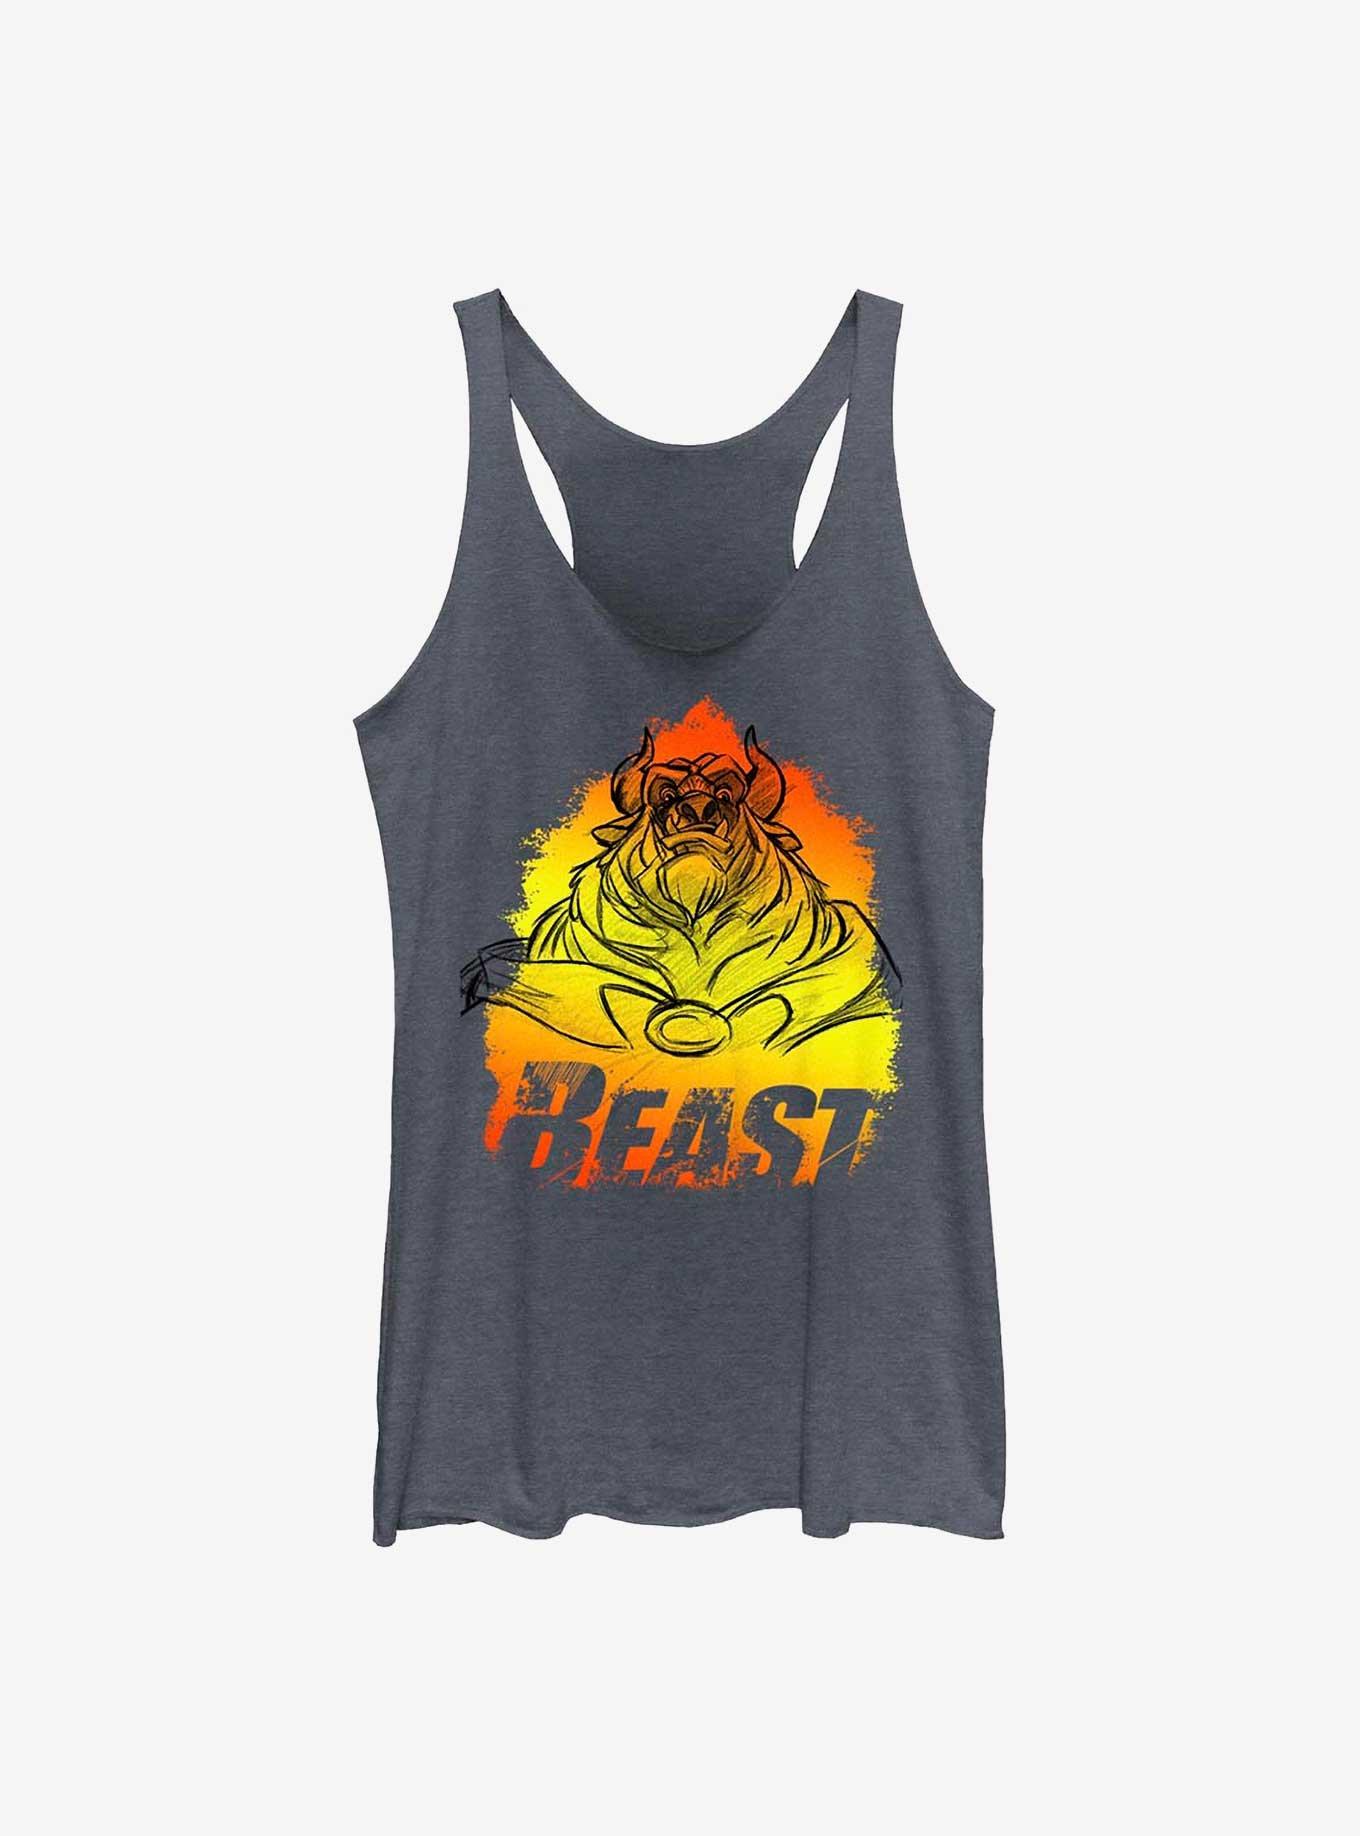 Disney Beauty and the Beast Flame Beast Girls Tank, NAVY HTR, hi-res